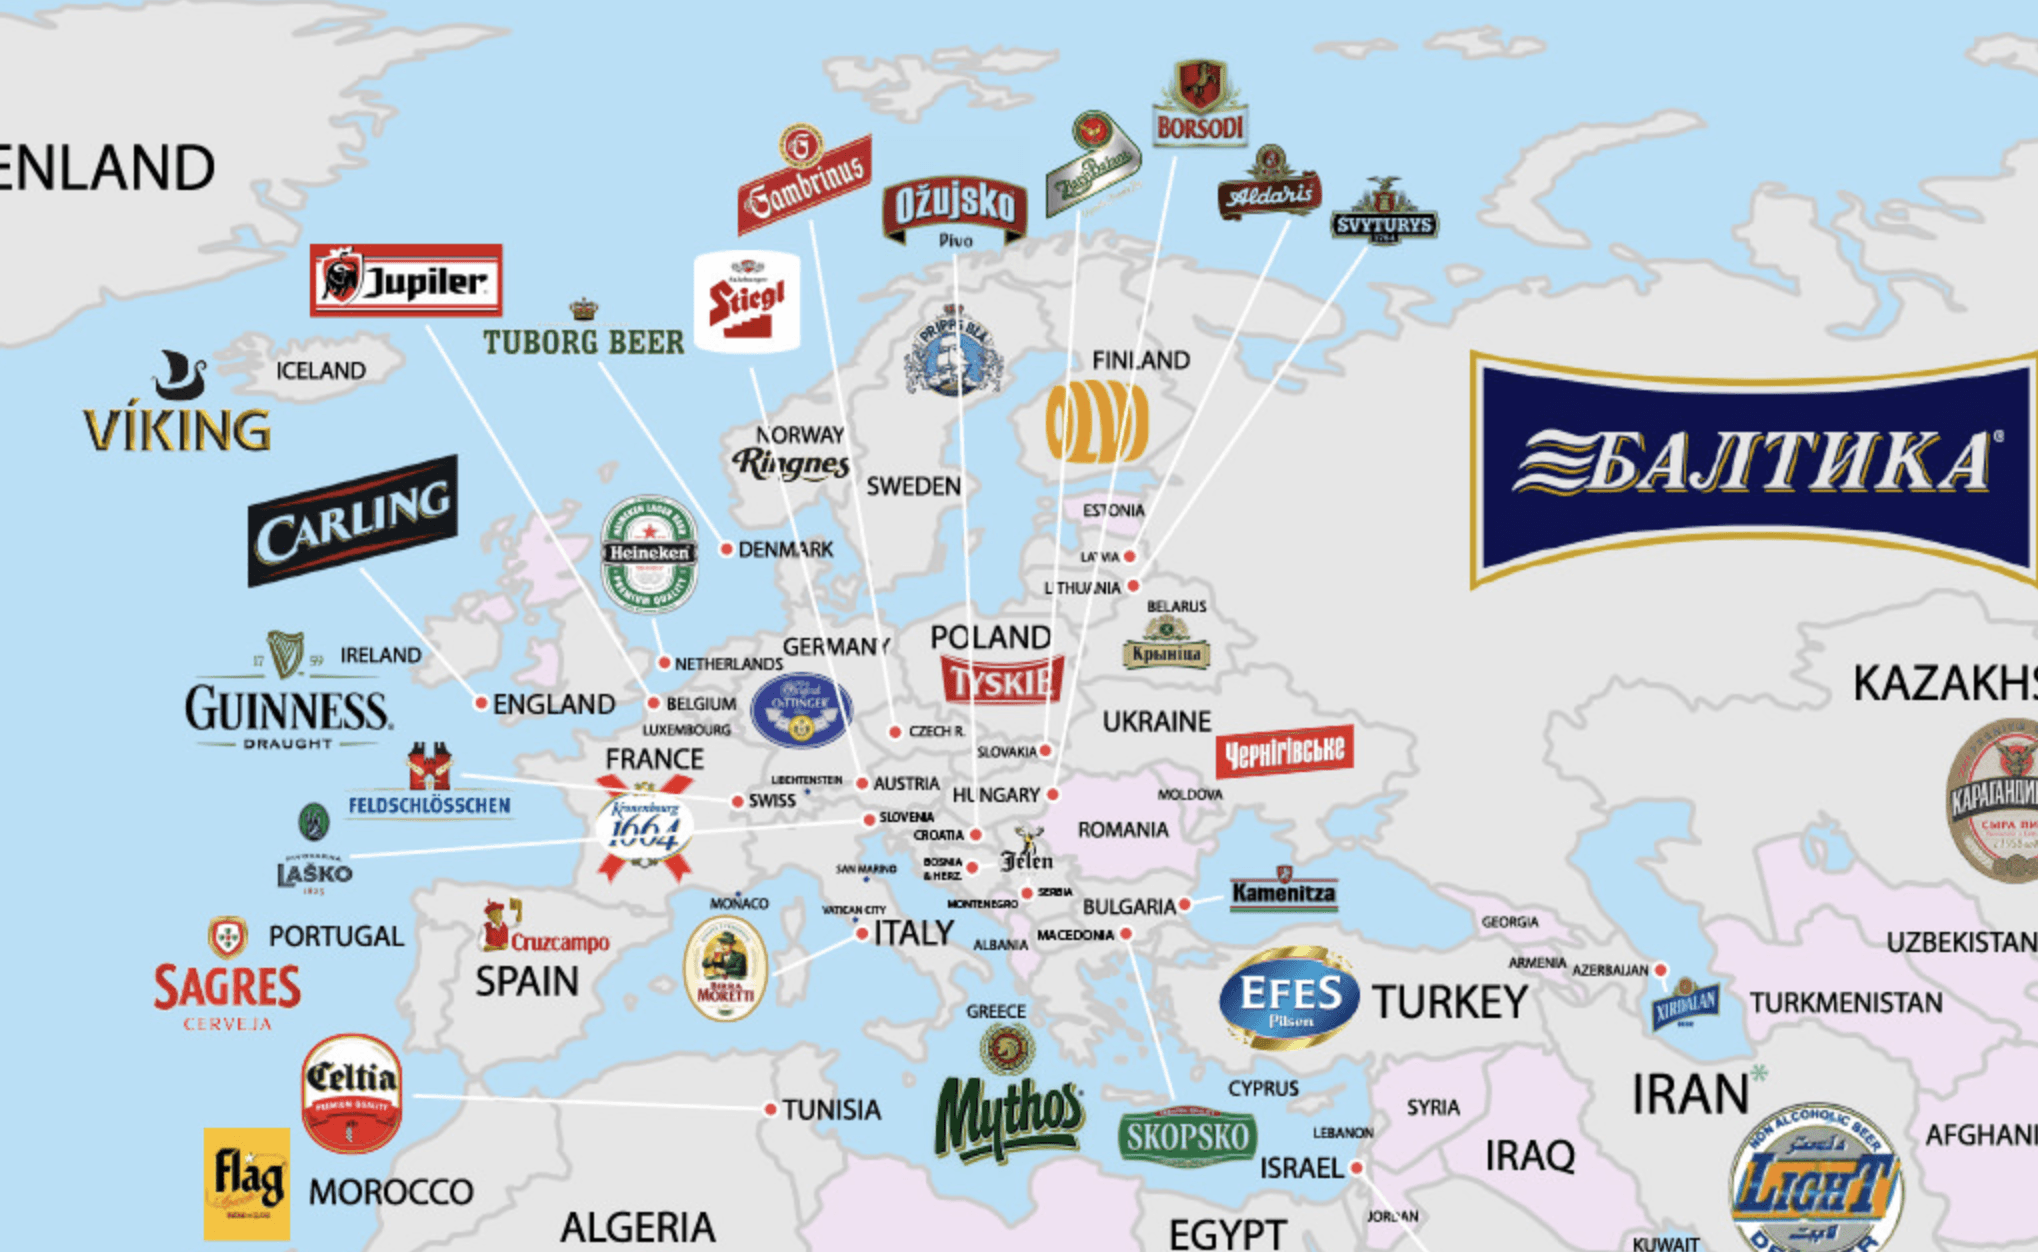 Most Famous Beer Logo - Most popular Beer, in every European country - according to ...